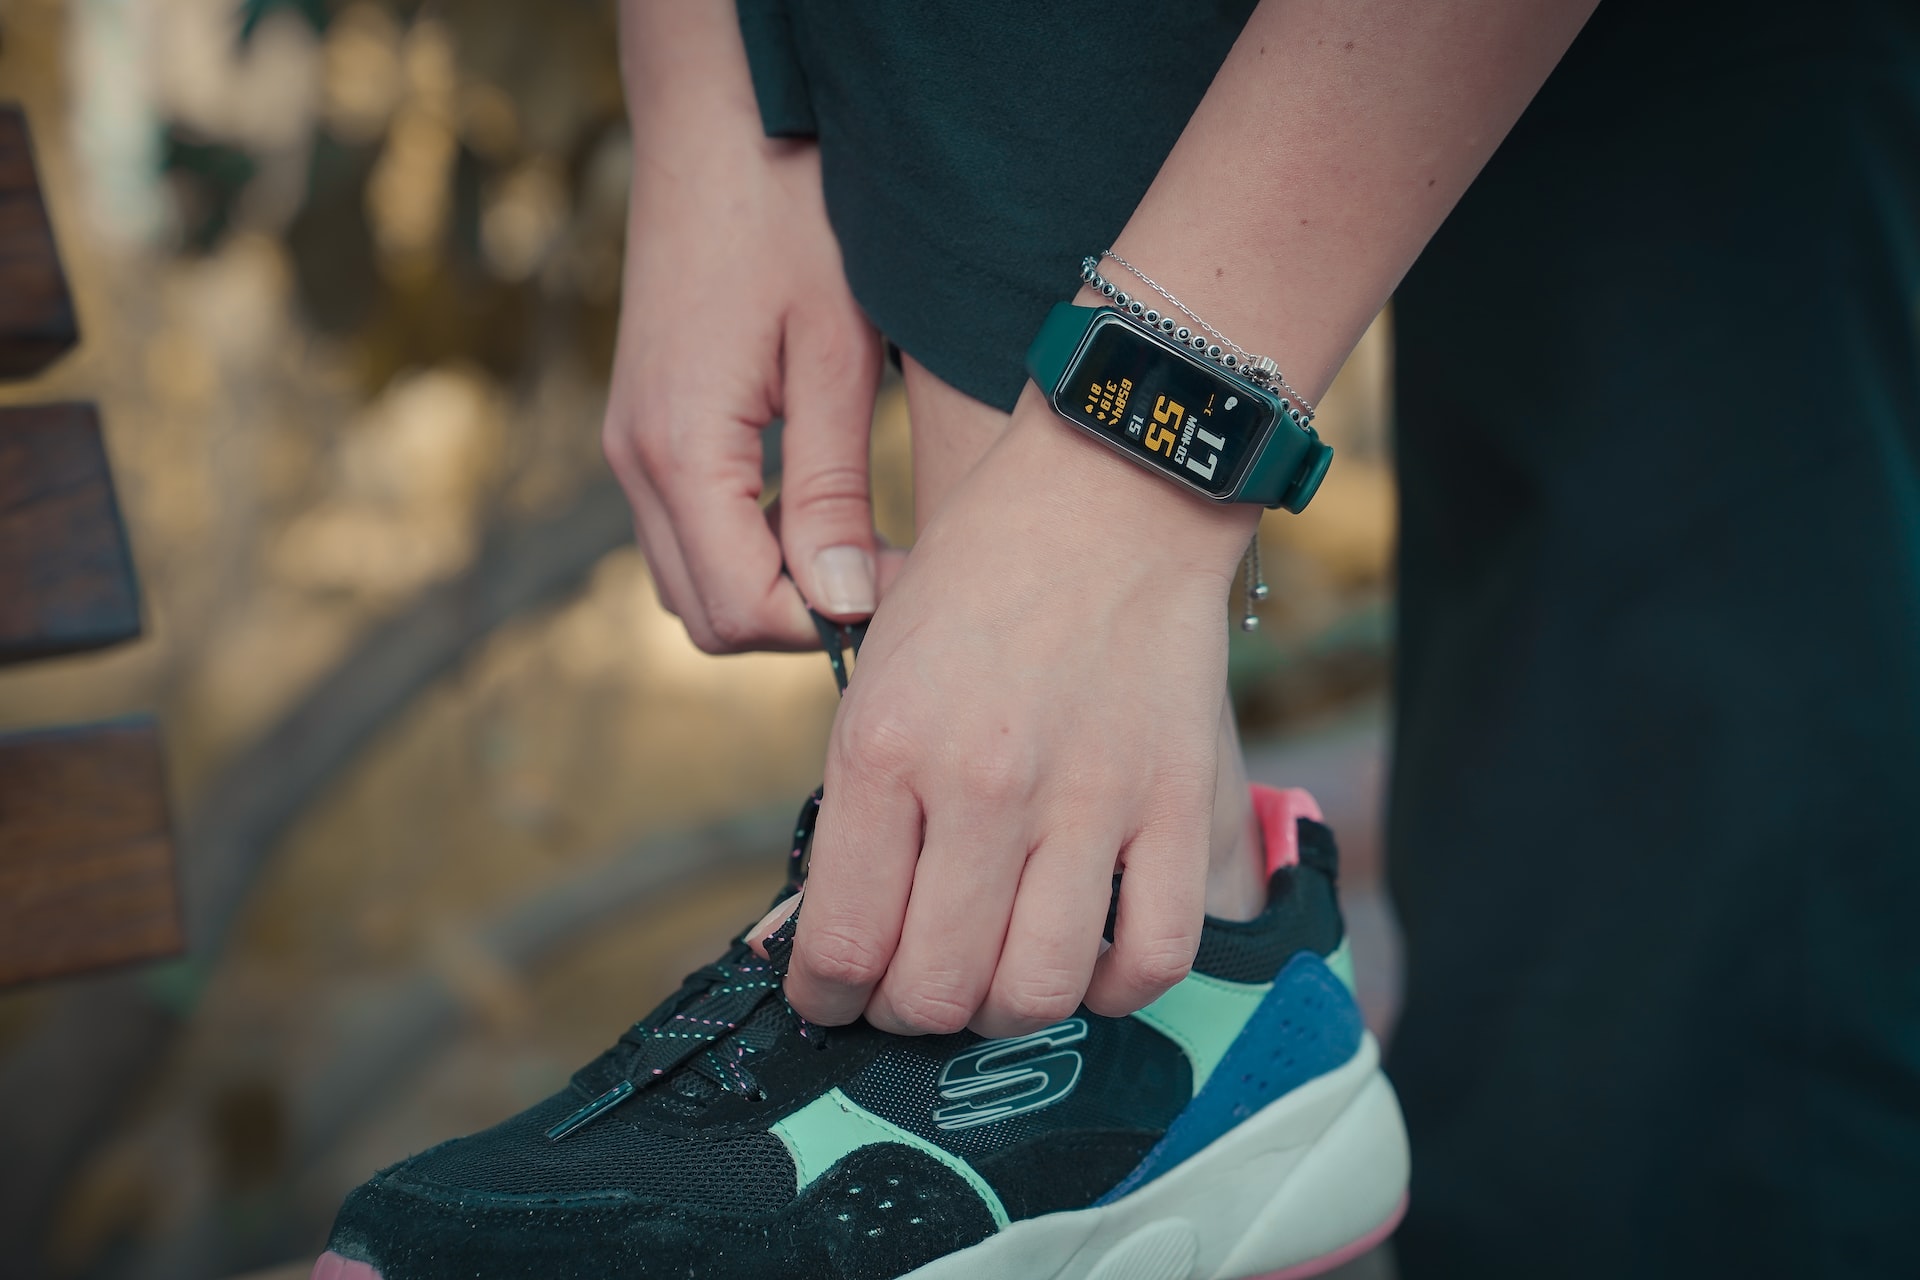 The Latest Trends in Wearable Fitness Technology